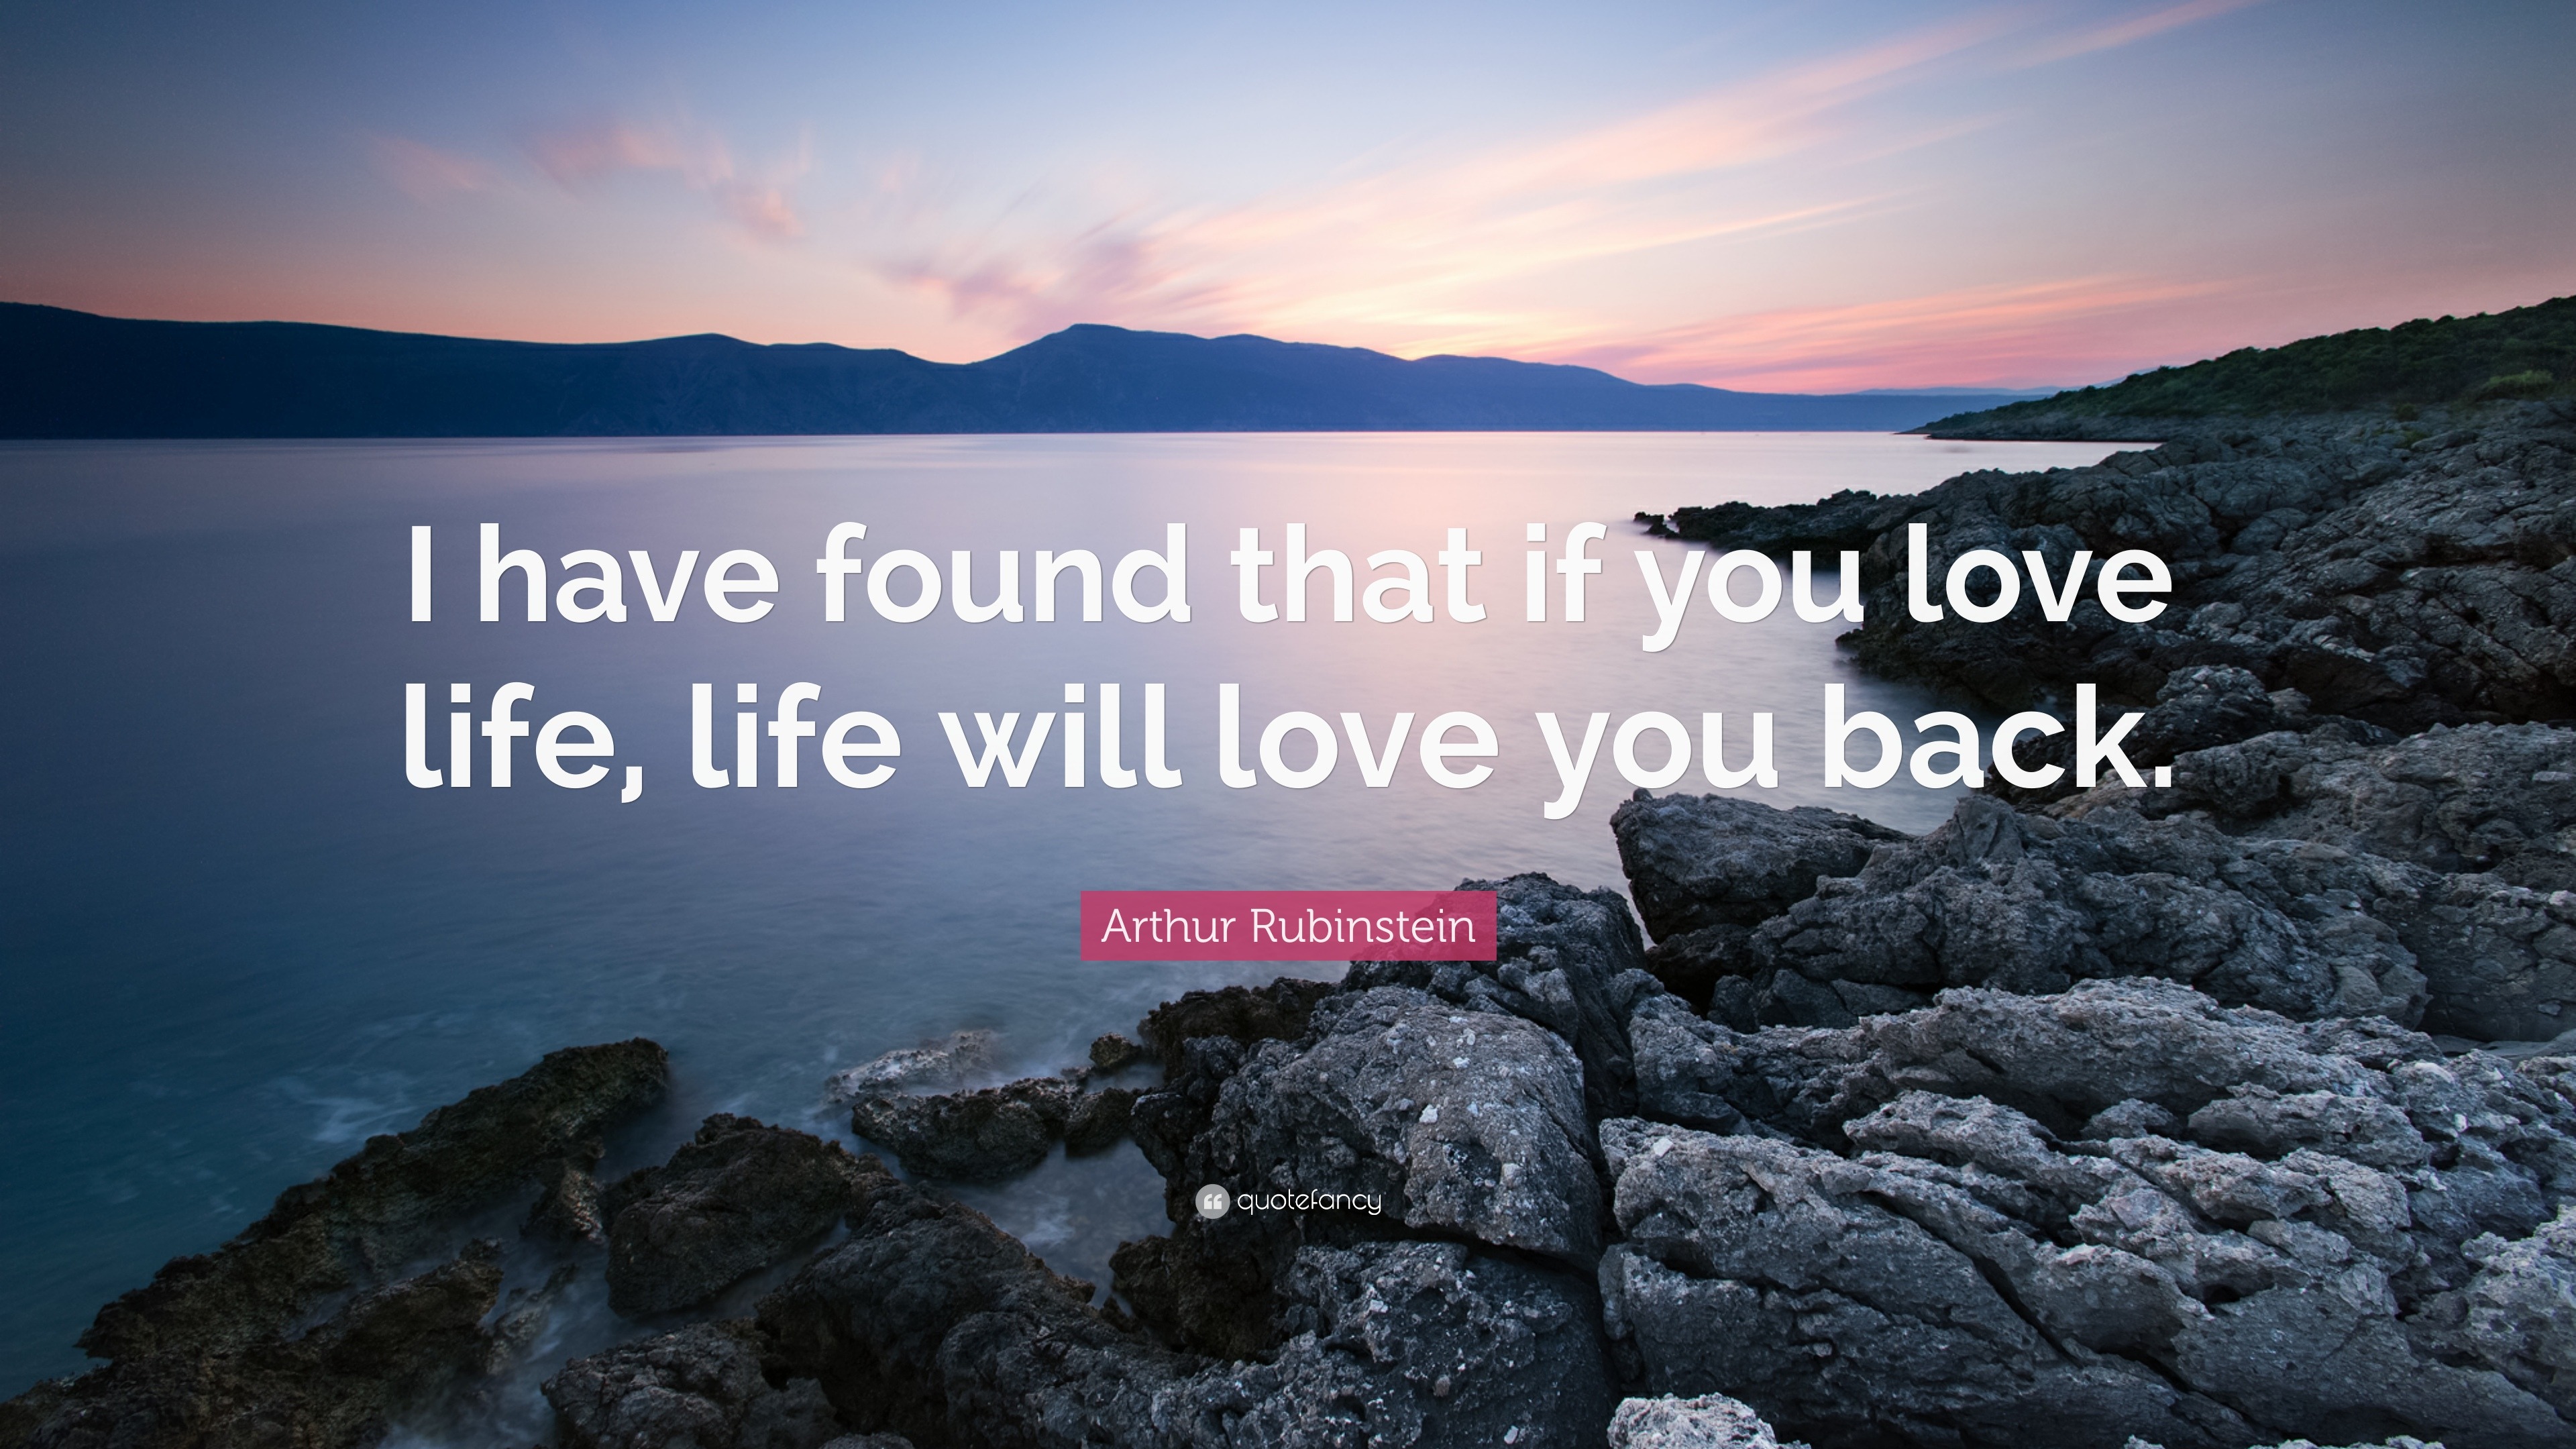 https://quotefancy.com/media/wallpaper/3840x2160/30947-Arthur-Rubinstein-Quote-I-have-found-that-if-you-love-life-life.jpg